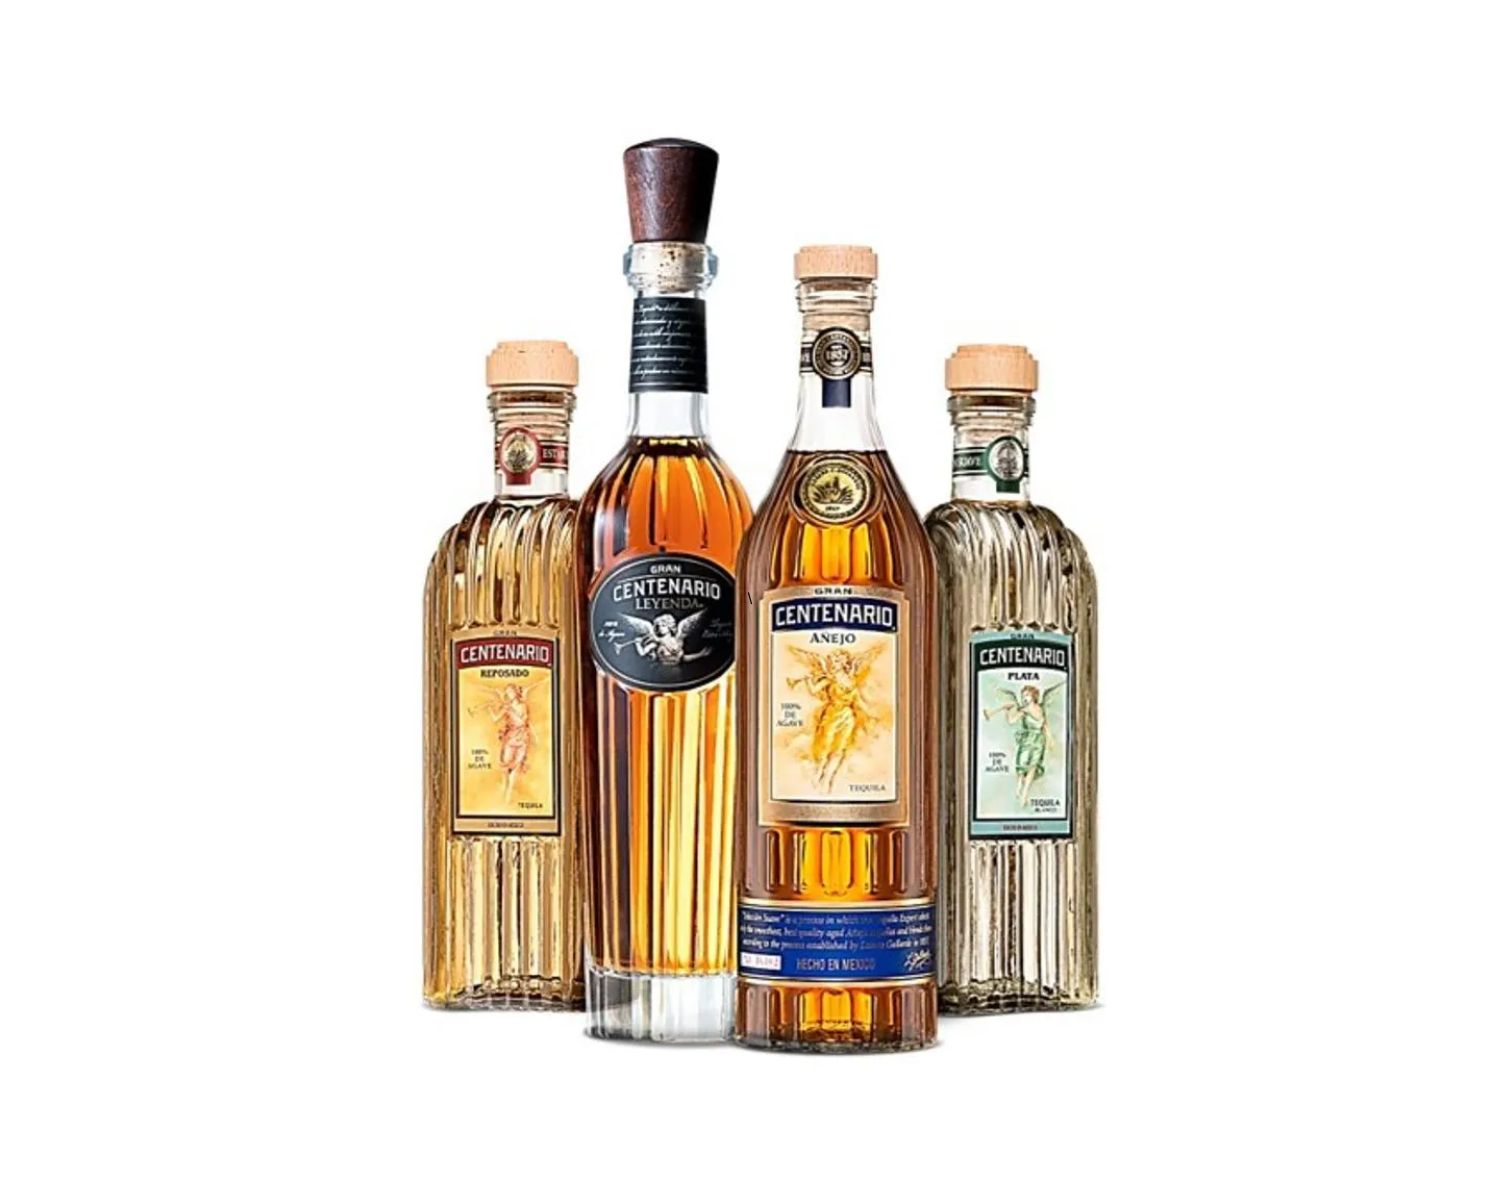 8-captivating-facts-about-gran-centenario-tequila